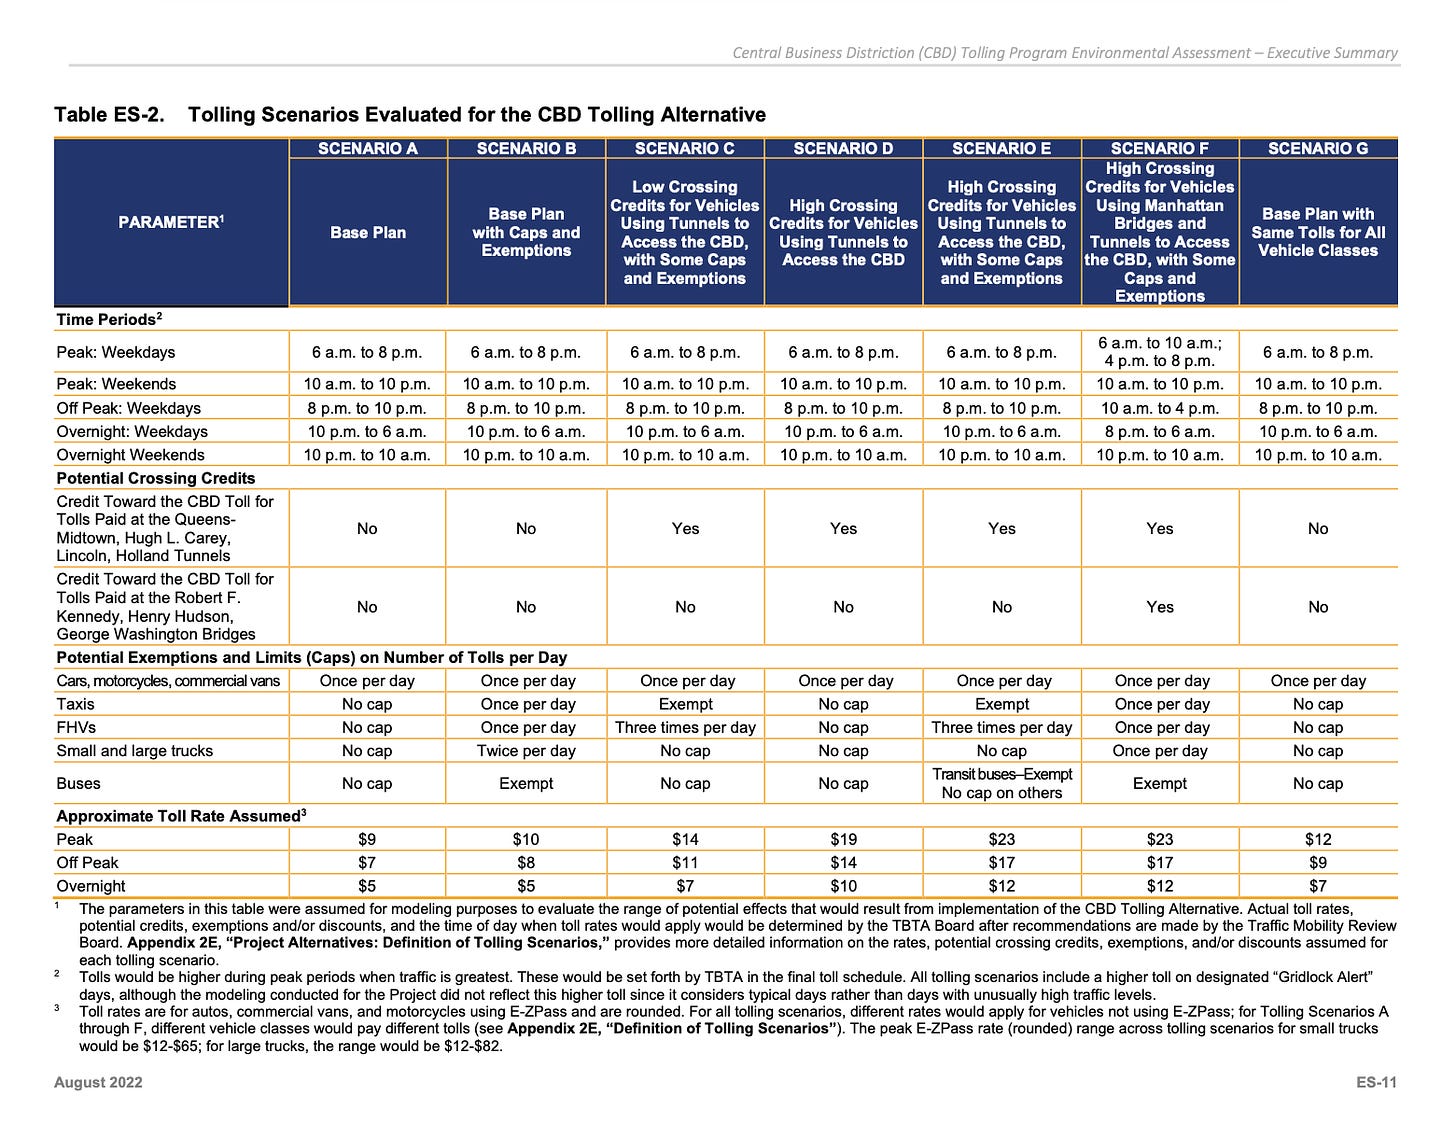 A table showing all the proposed congestion pricing scenarios.